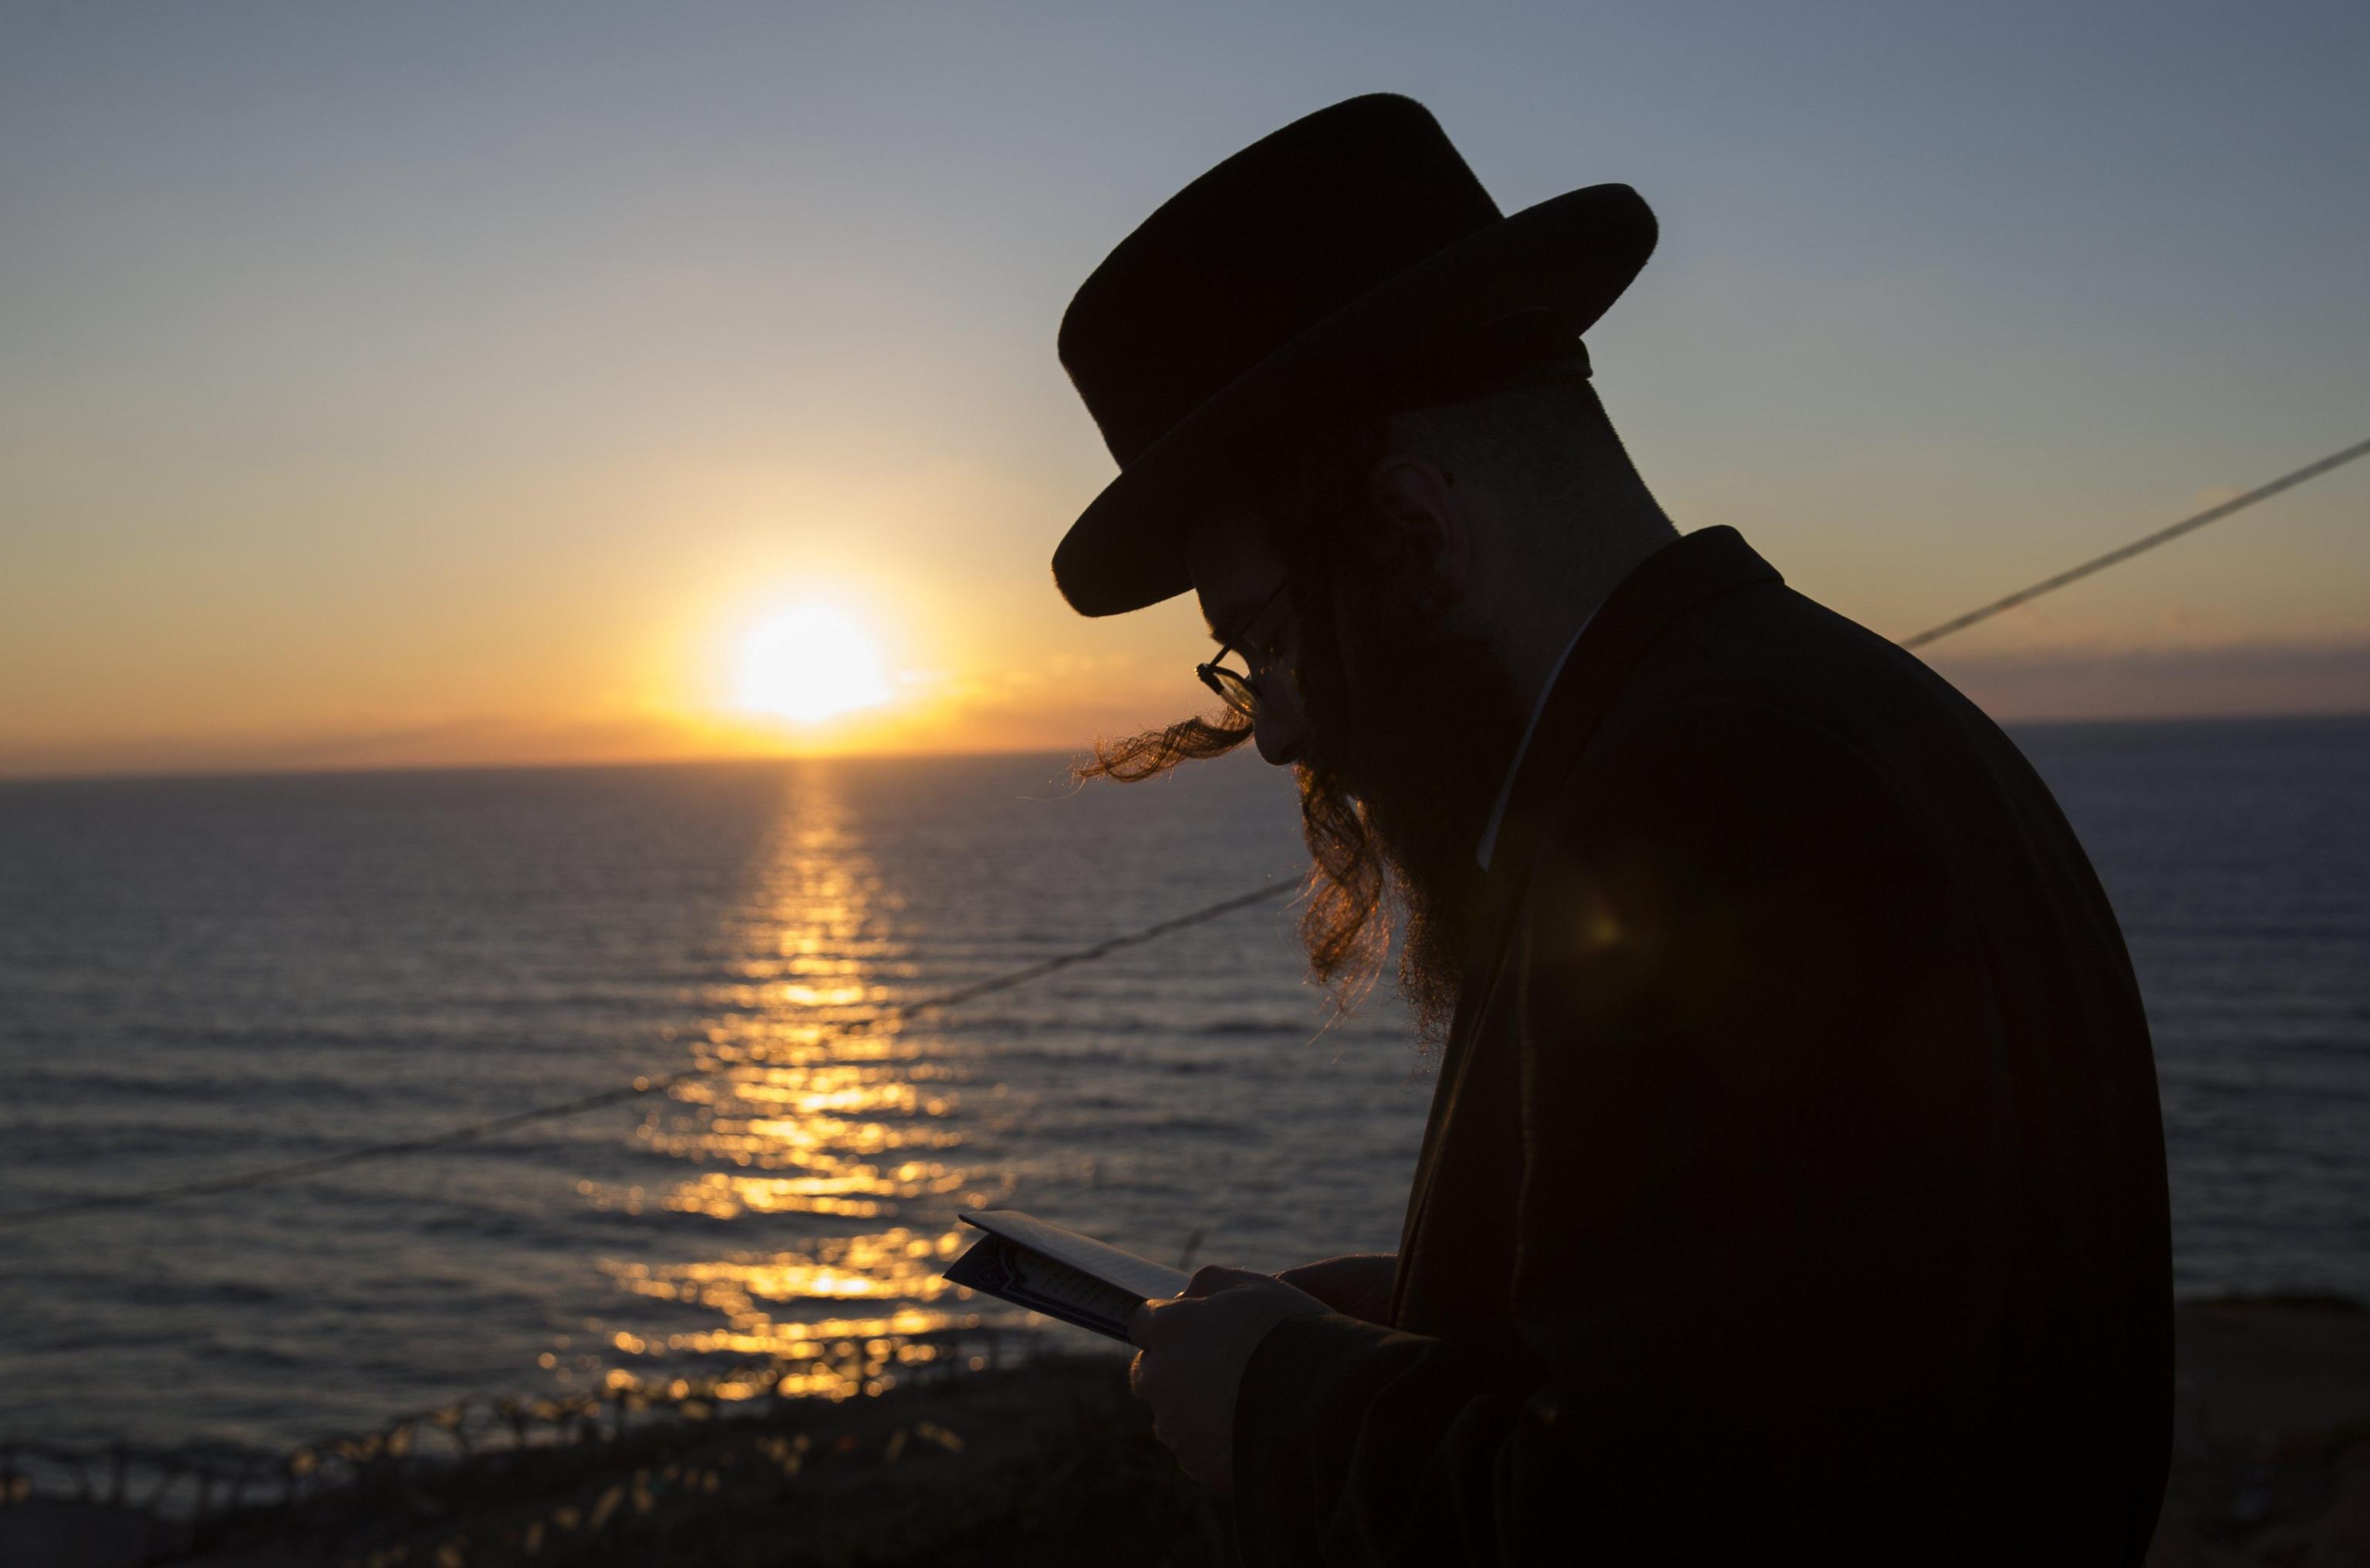 epa06232612 An Ultra-Orthodox Jew performs a Jewish prayer named Tashlich a day ahead of Yom Kippur, on a hill overlooking the Mediterranean Sea, next to the Israeli city of Herzeliya, Israel, 28 September 2017. Yom Kippur begins at sunset of 29 September 2017 when the entire country comes to a standstill as people fast and spend much of the day in prayer till the evening of 30 September 2017.  EPA/ATEF SAFADI